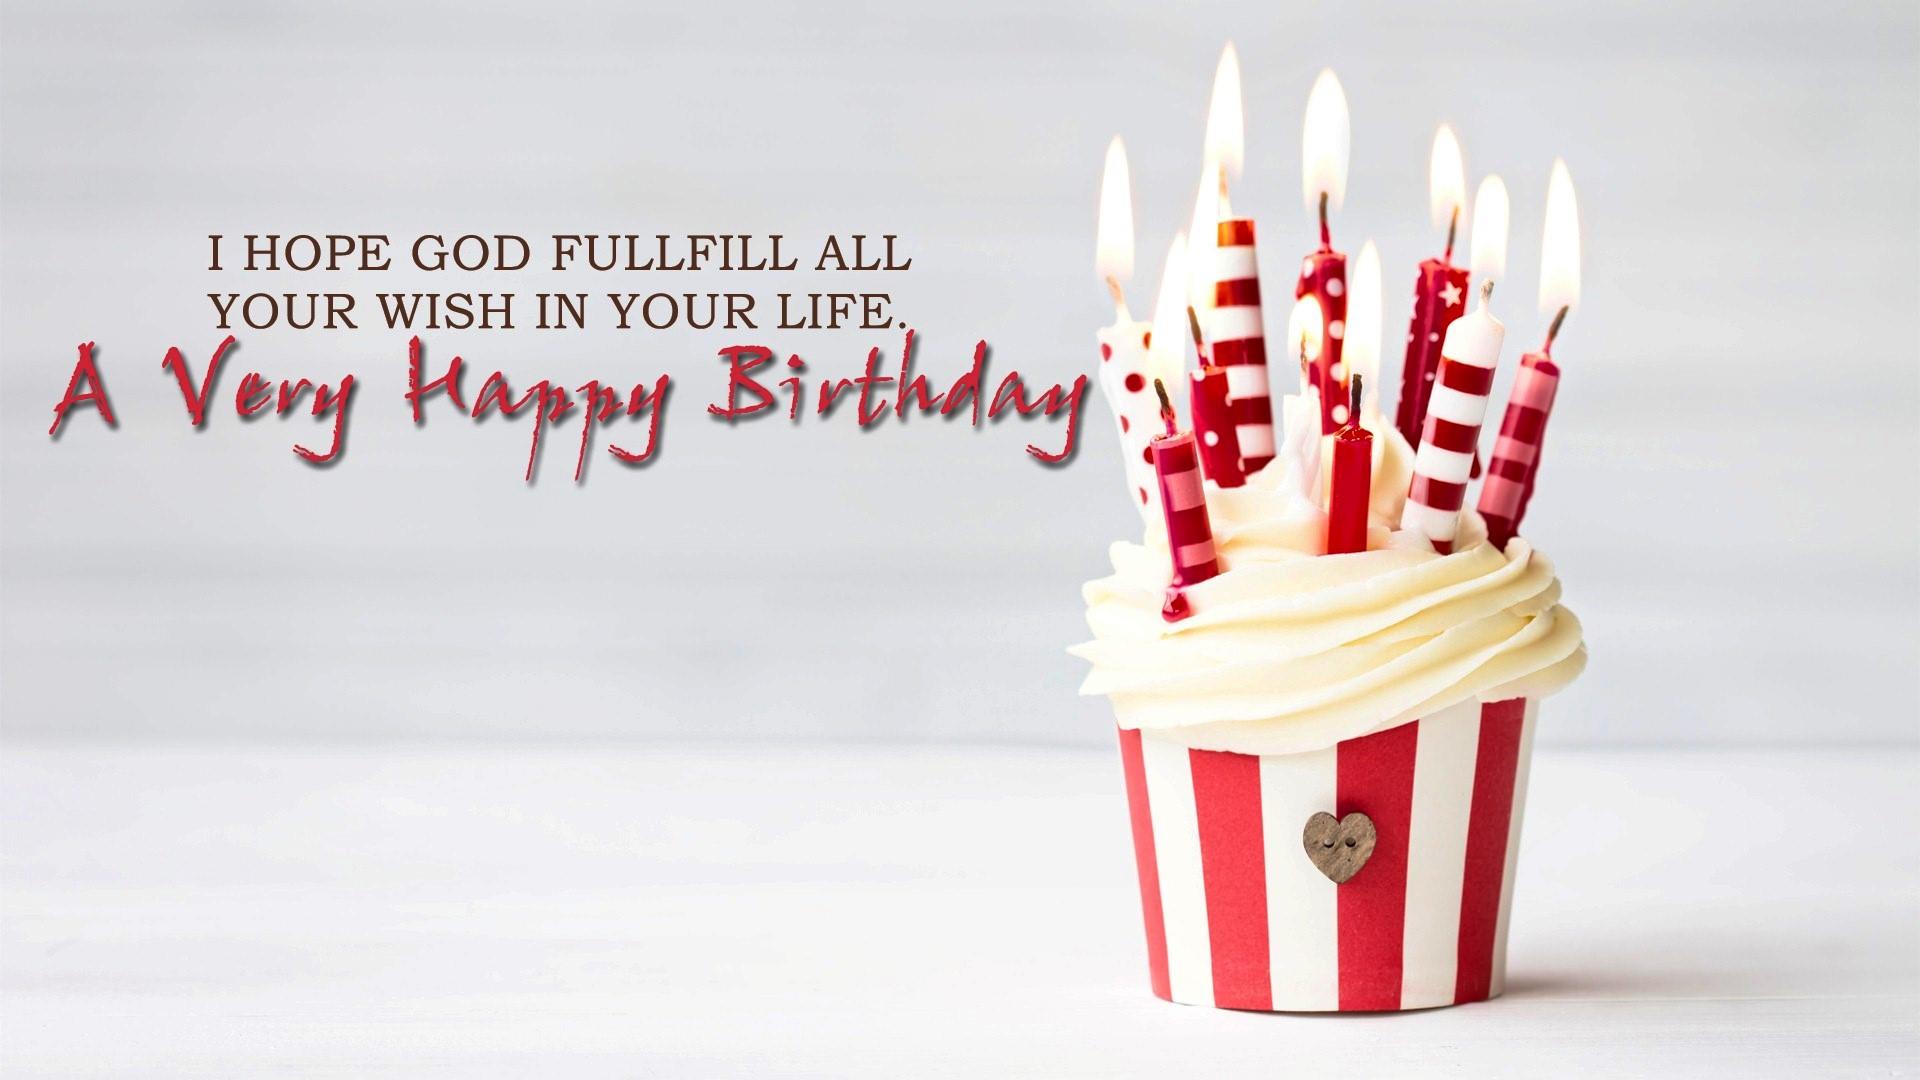 Happy-Birthday-Wishing-Quote-Greetings-HD-Wallpapers-15224455-1920x1080